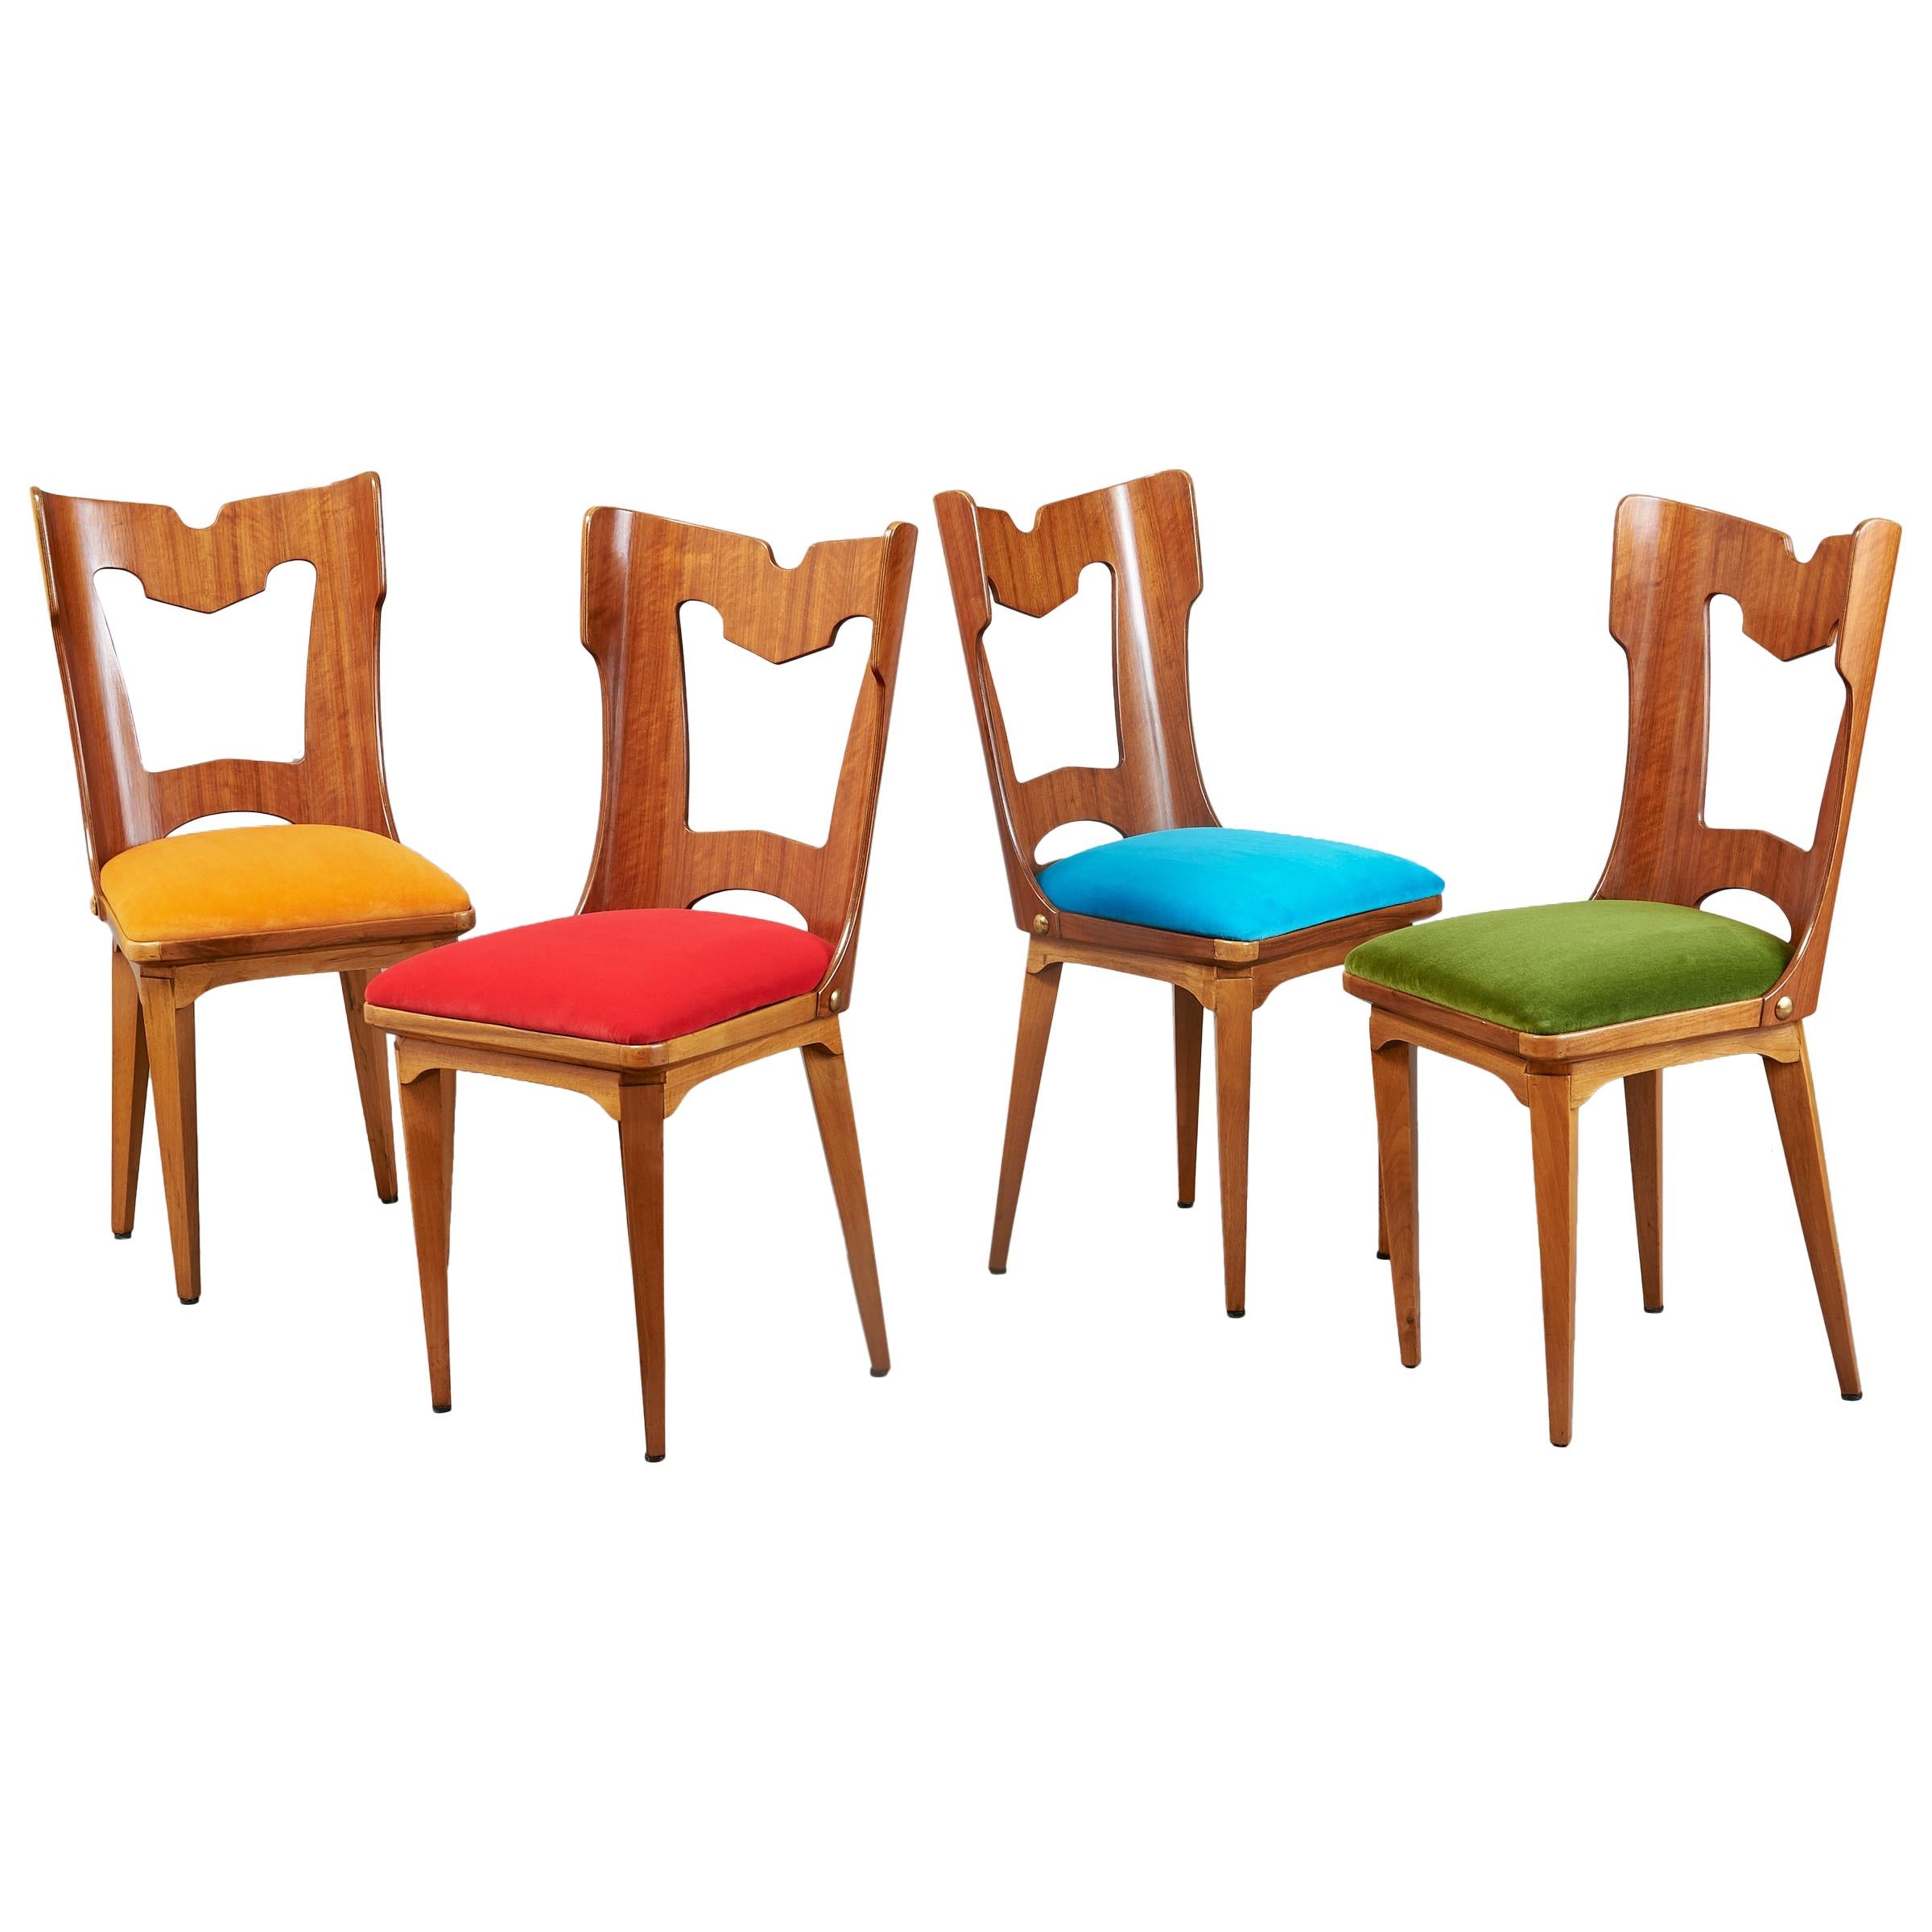 Set of Four Sculptural Chairs, Italy, 1950s